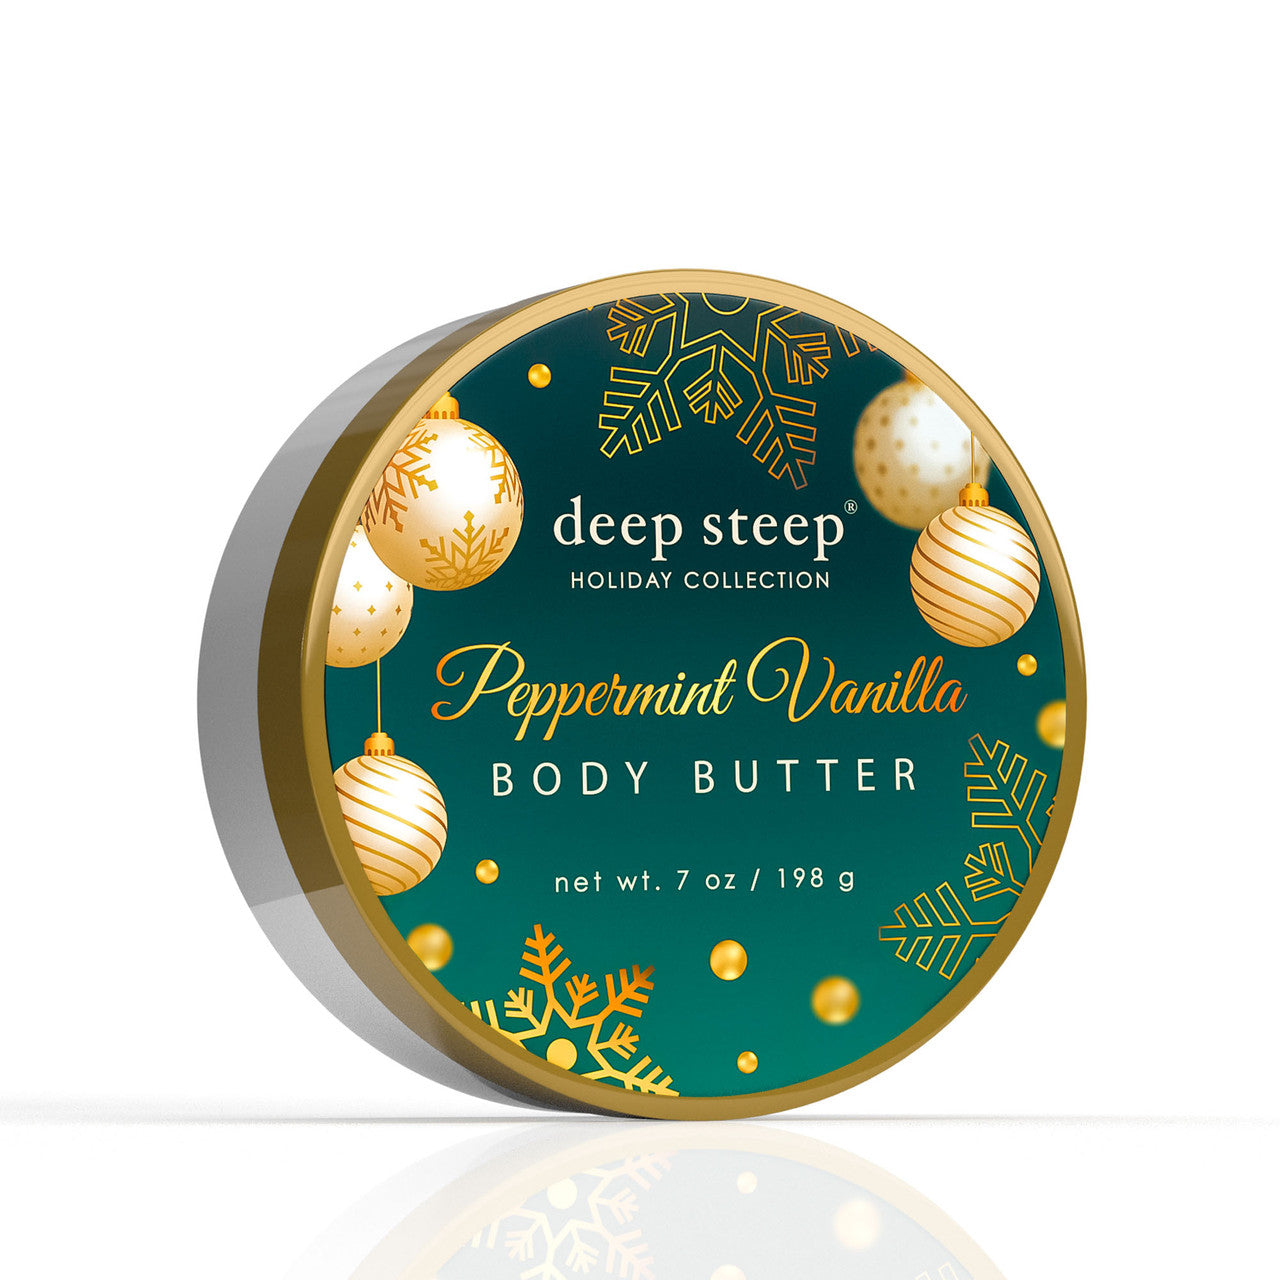 Whipped Body Butter Infused with Peppermint, Vanilla and